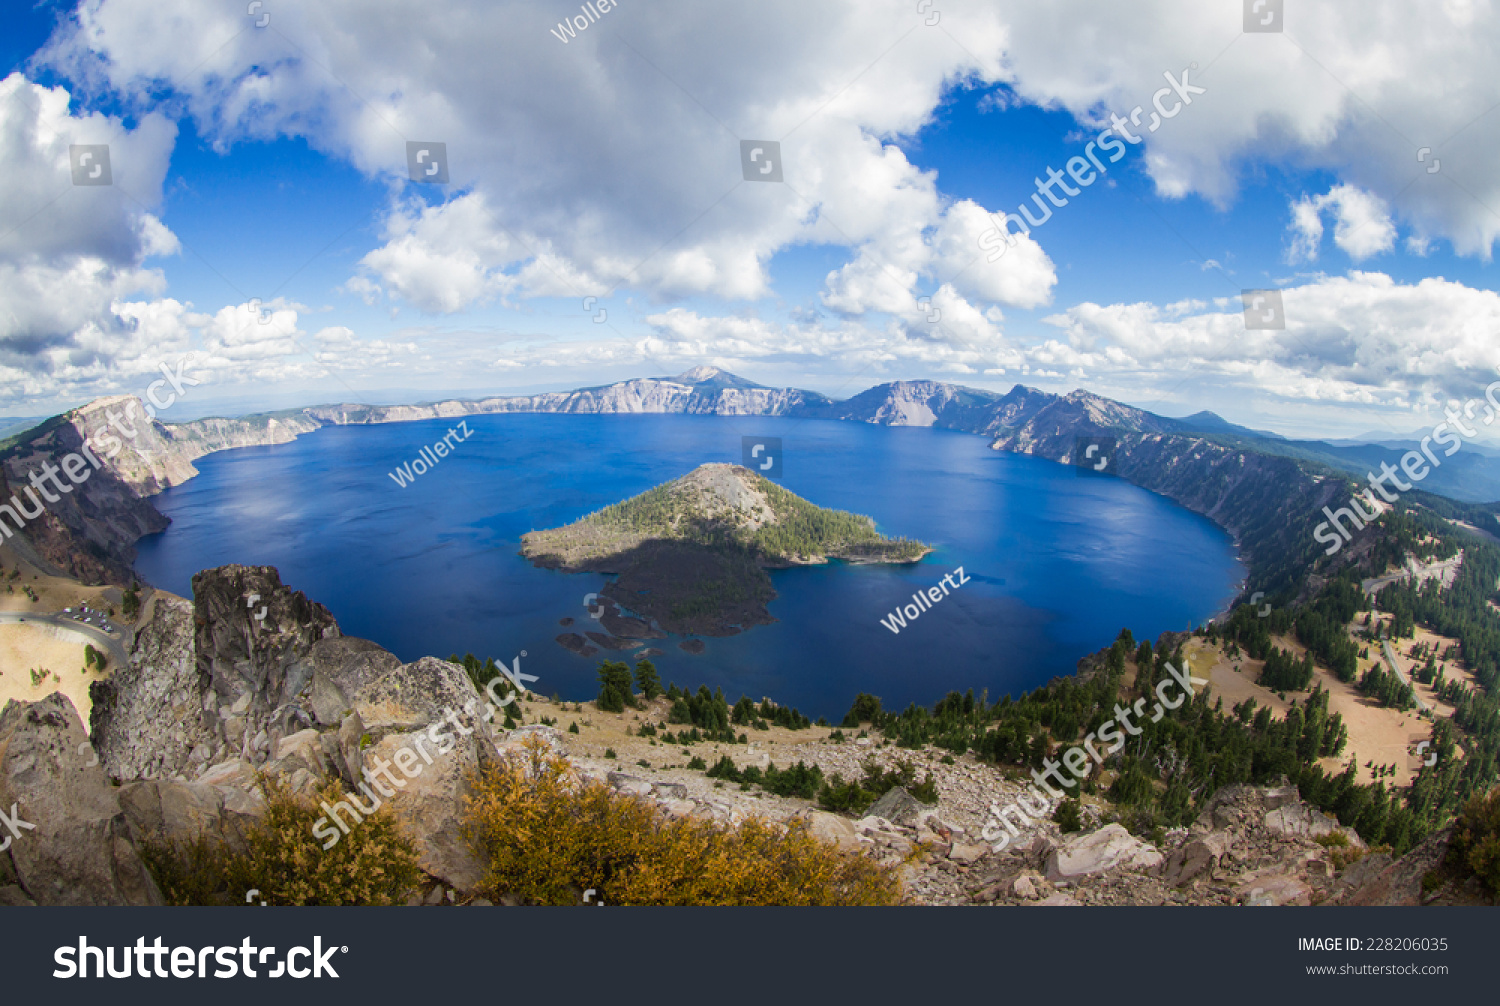 wide angle view of Crater Lake form the top of Watchman's Peak, beautiful landscape in Oregon #228206035